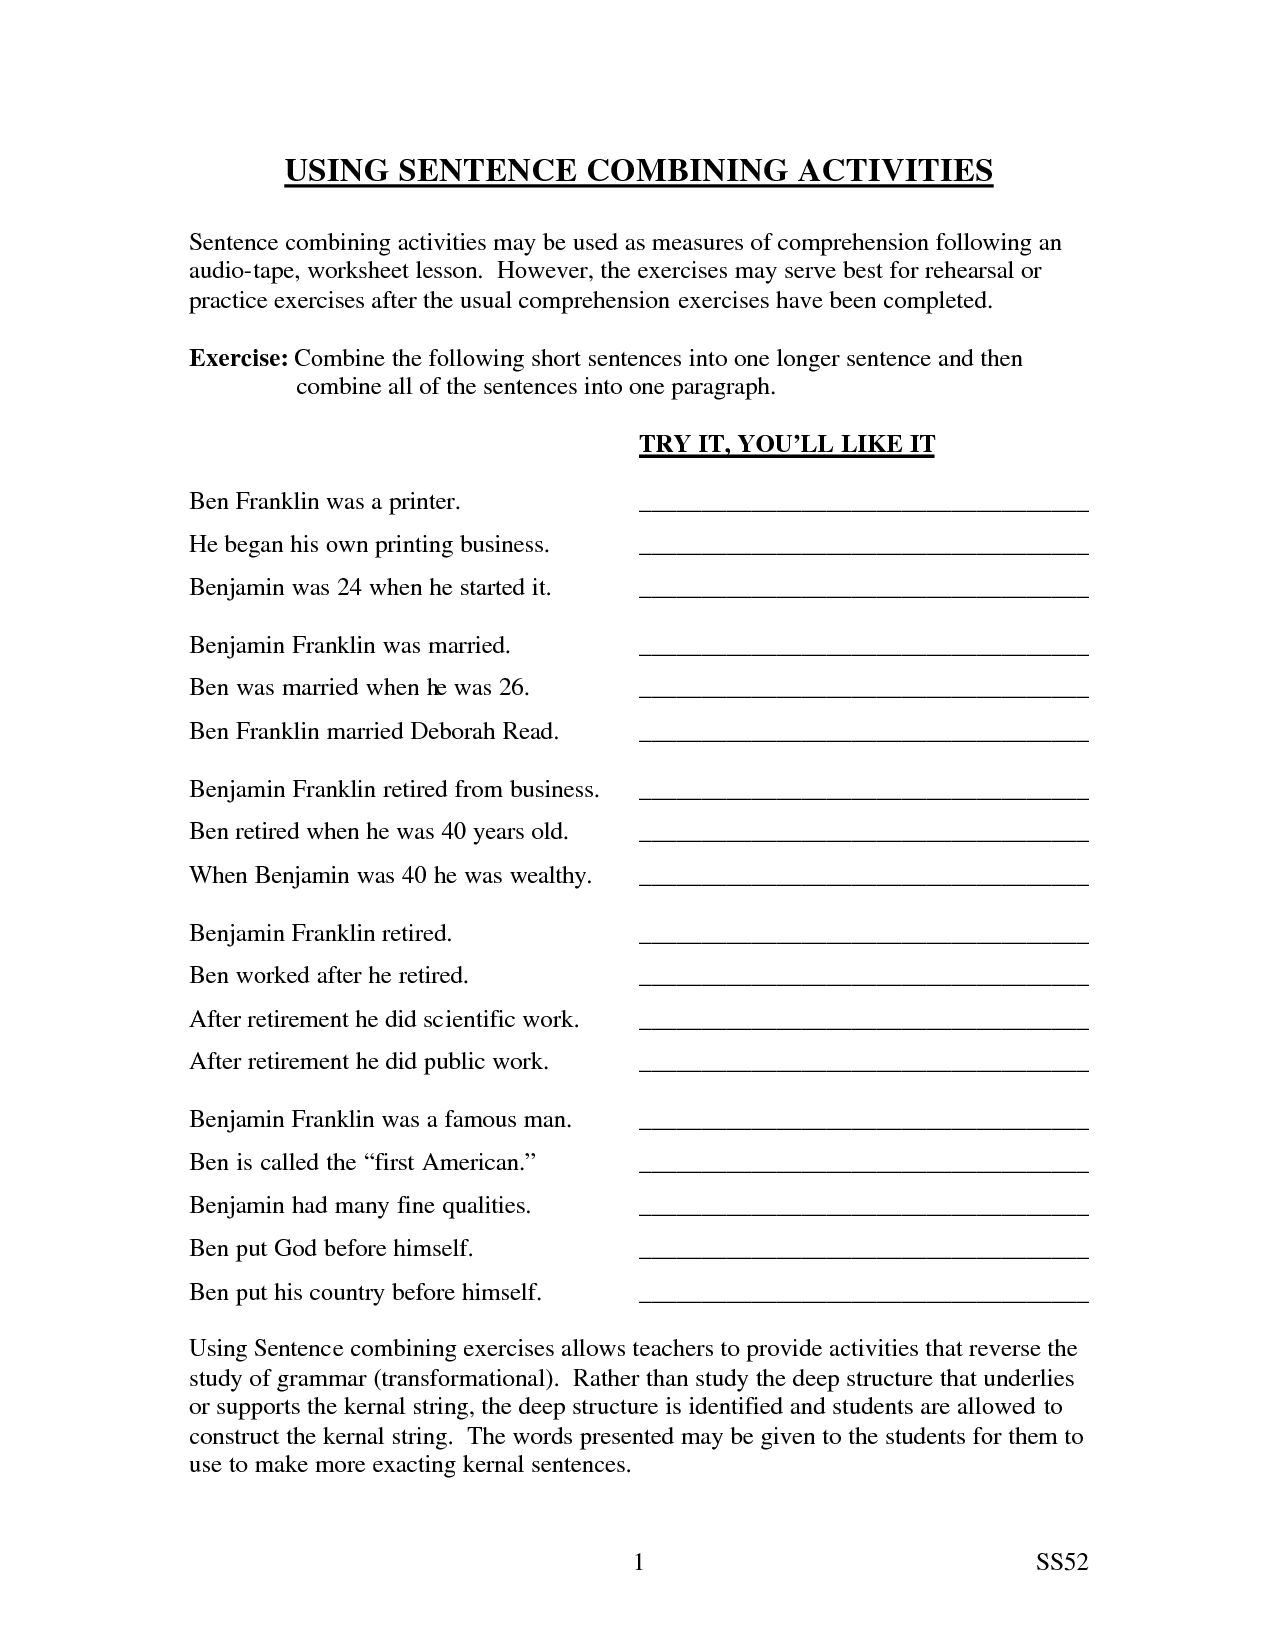 fragments-and-run-on-sentences-worksheet-for-6th-grade-lesson-planet